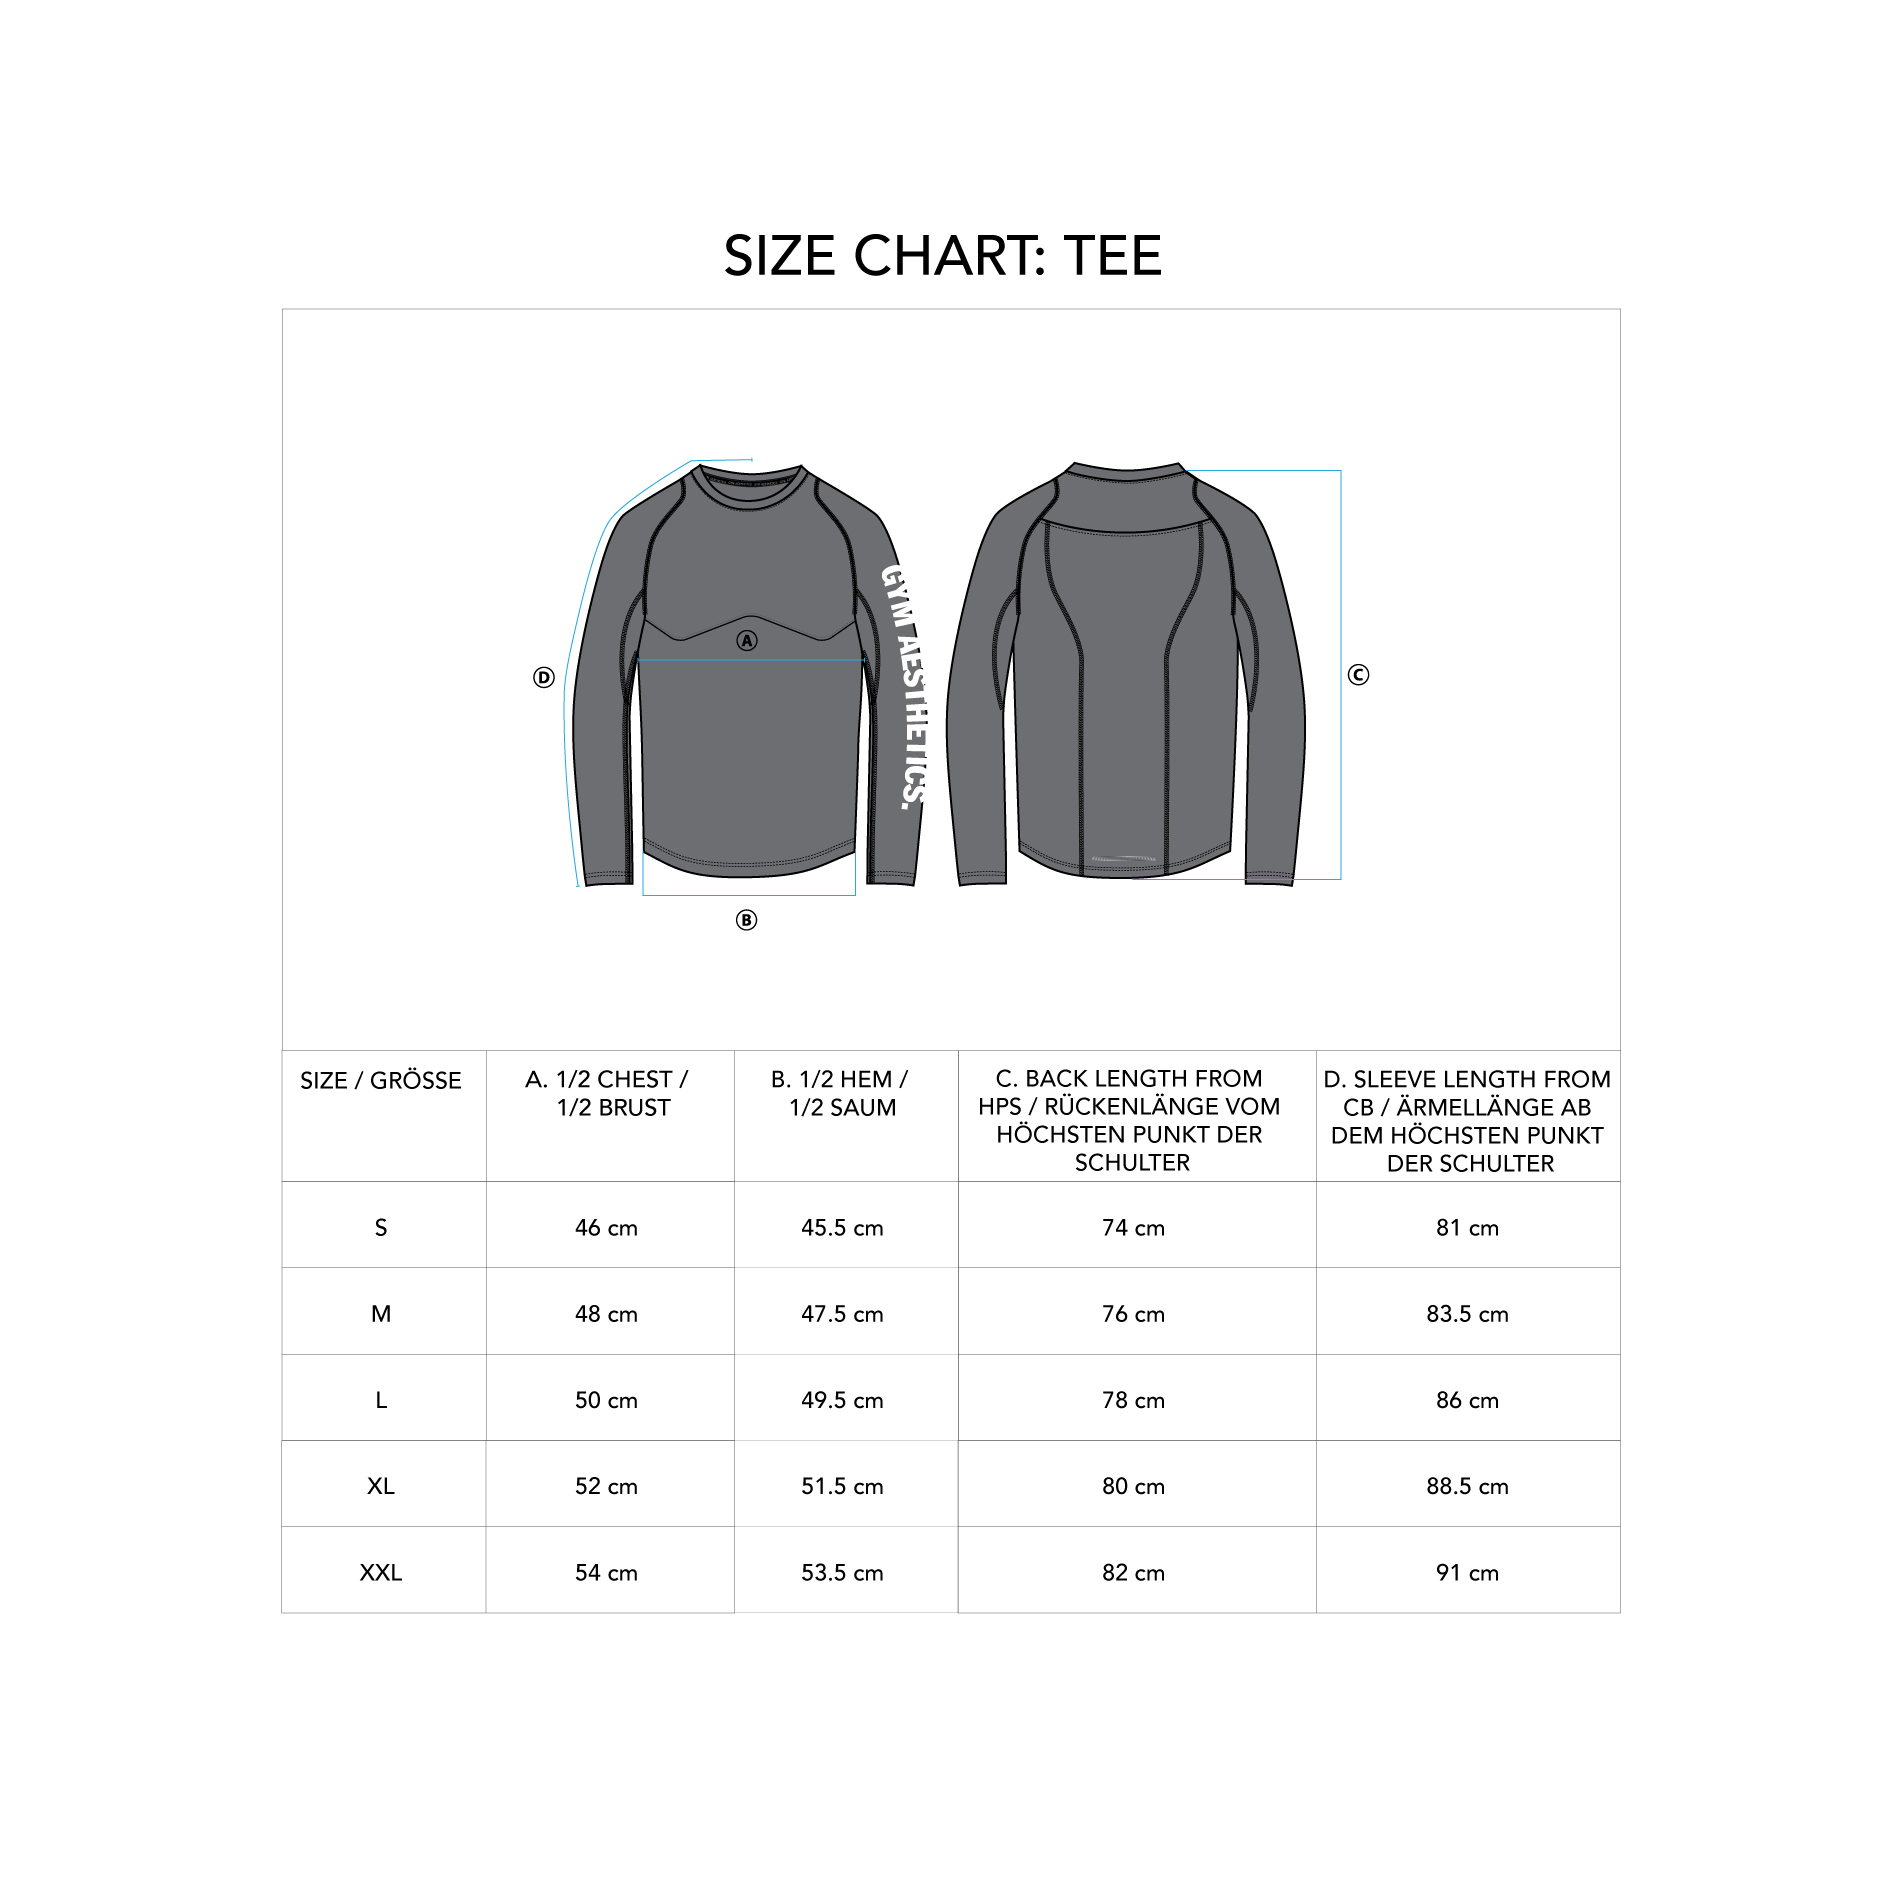 Performance Tight-Fit T-Shirt for Men - size chart